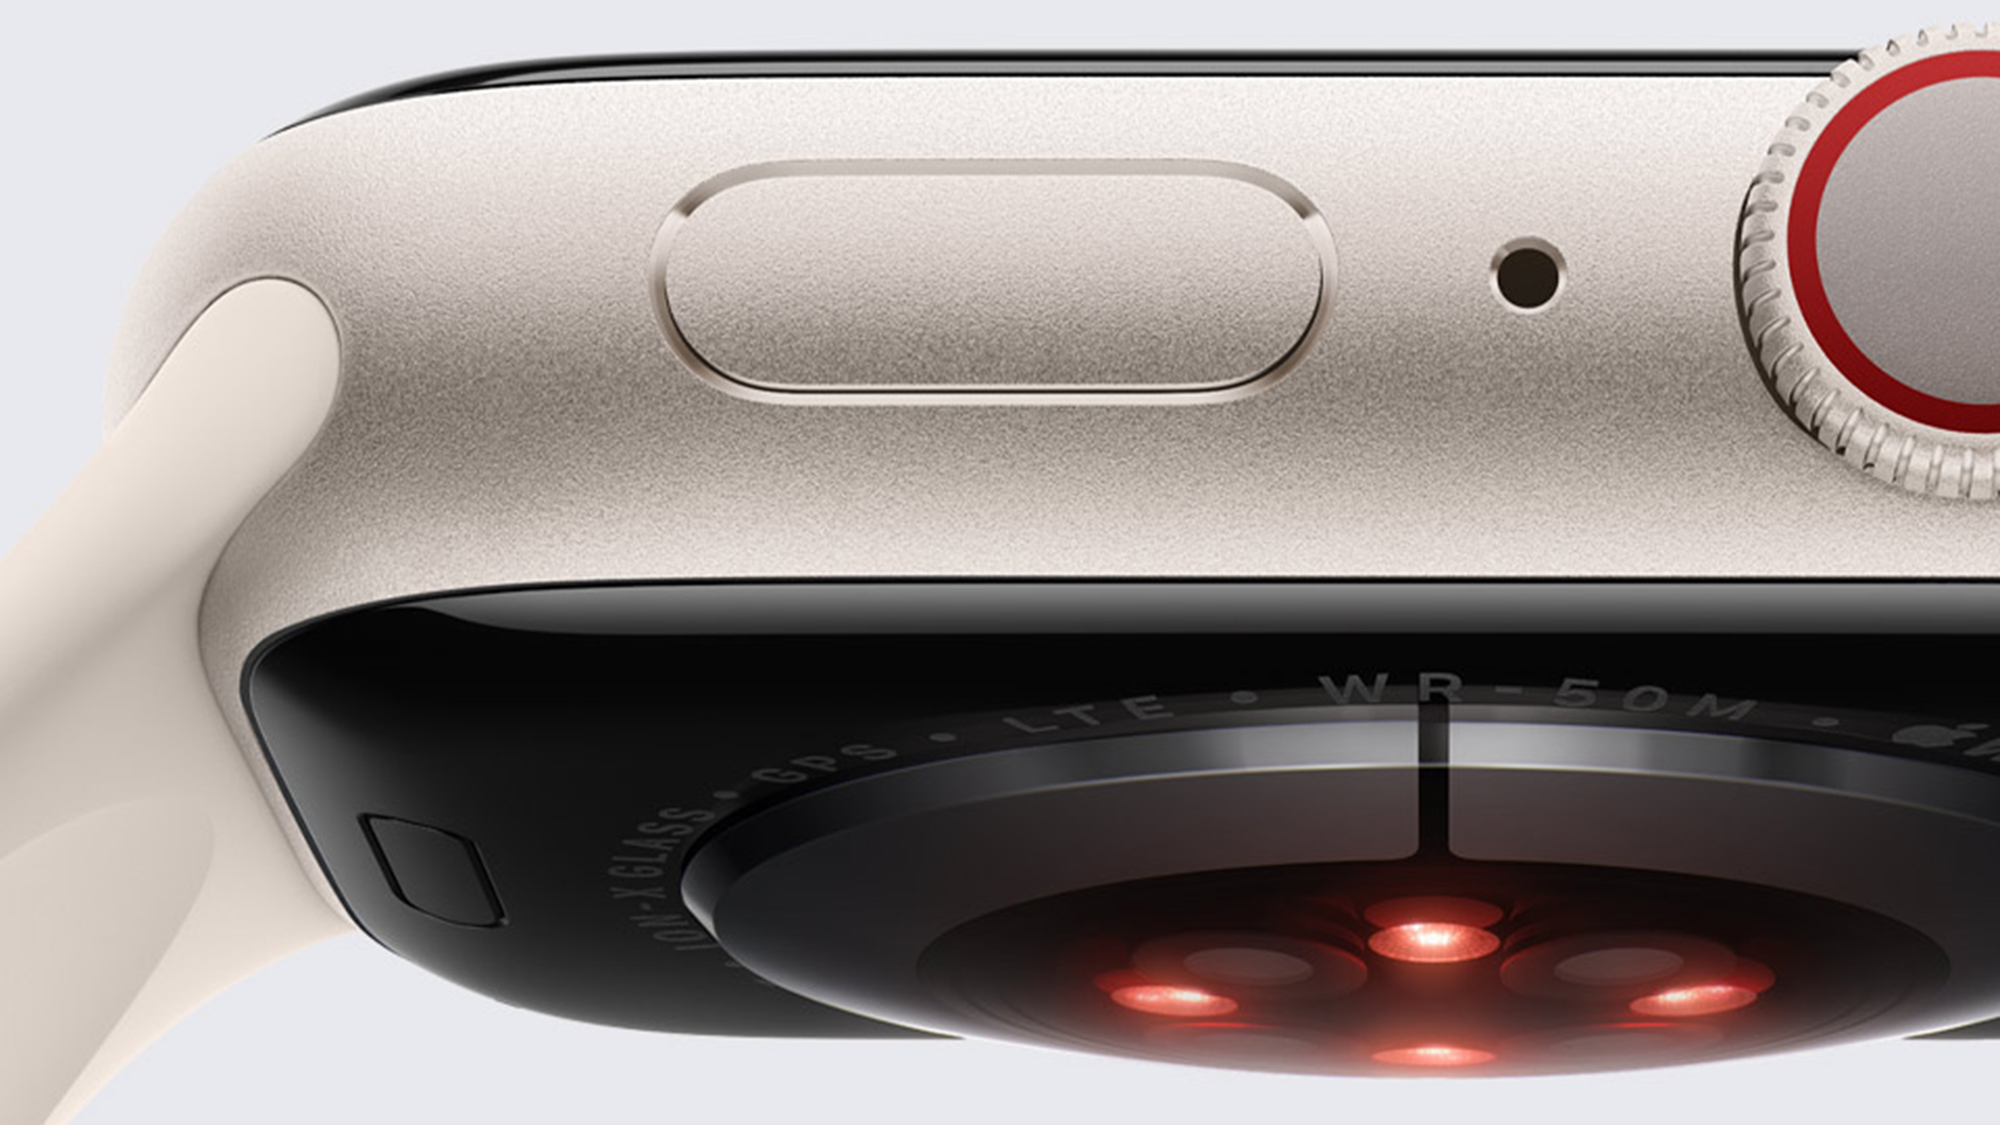 You may not be able to buy the latest Apple Watches after December 24th